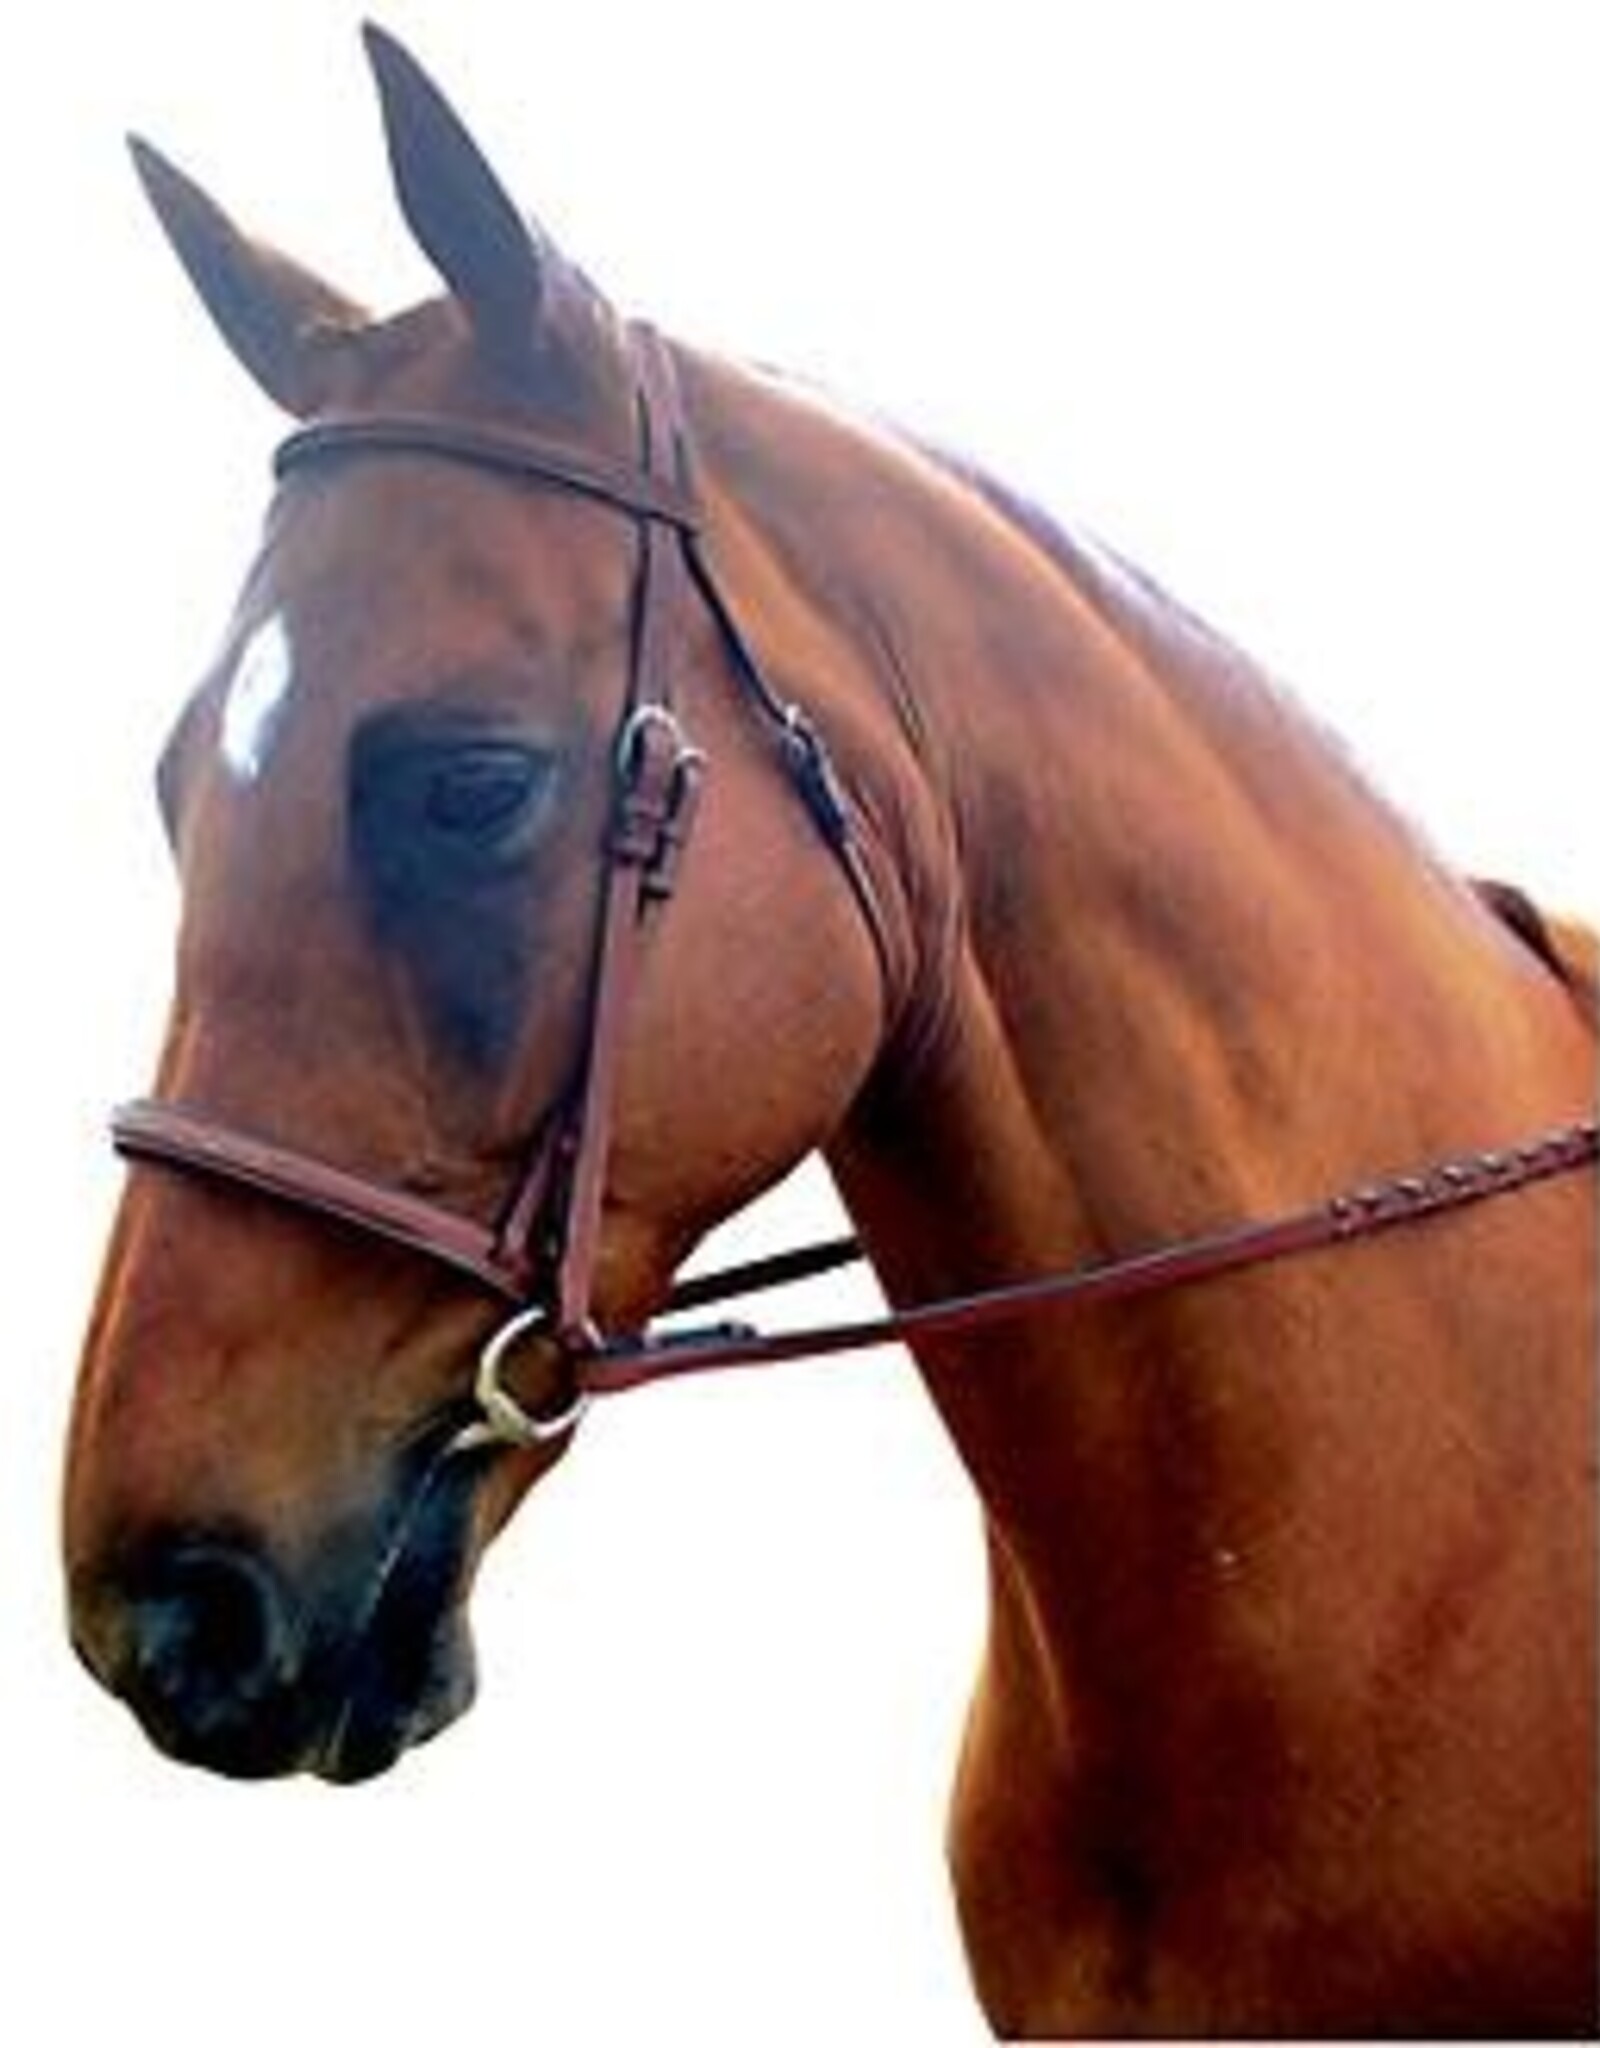 Raised Padded Fancy Stitched Bridle